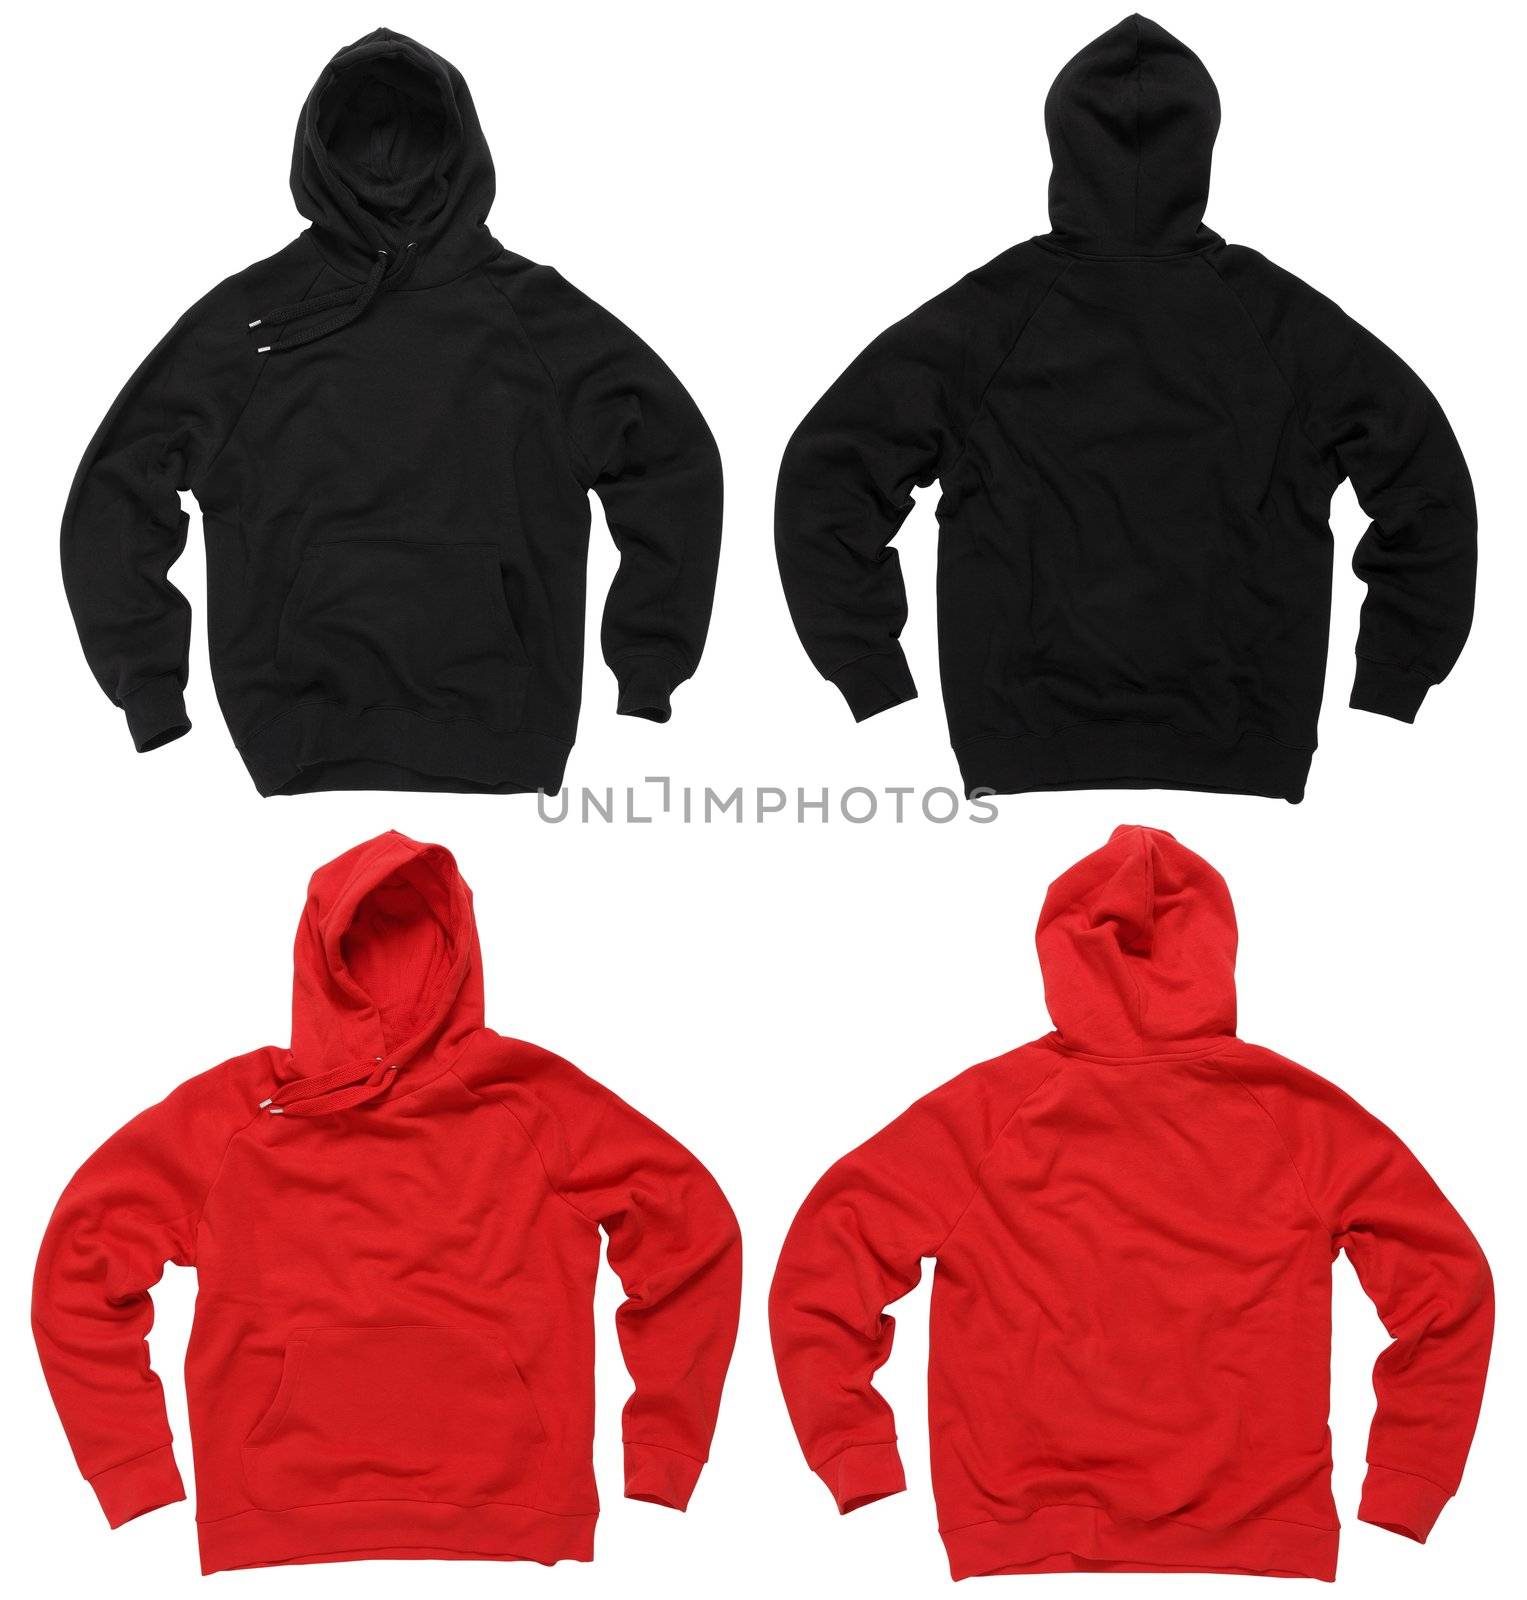 Photograph of two blank hoodie sweatshirts, red and black, front and back.  Clipping paths included.  Ready for your design or artwork.